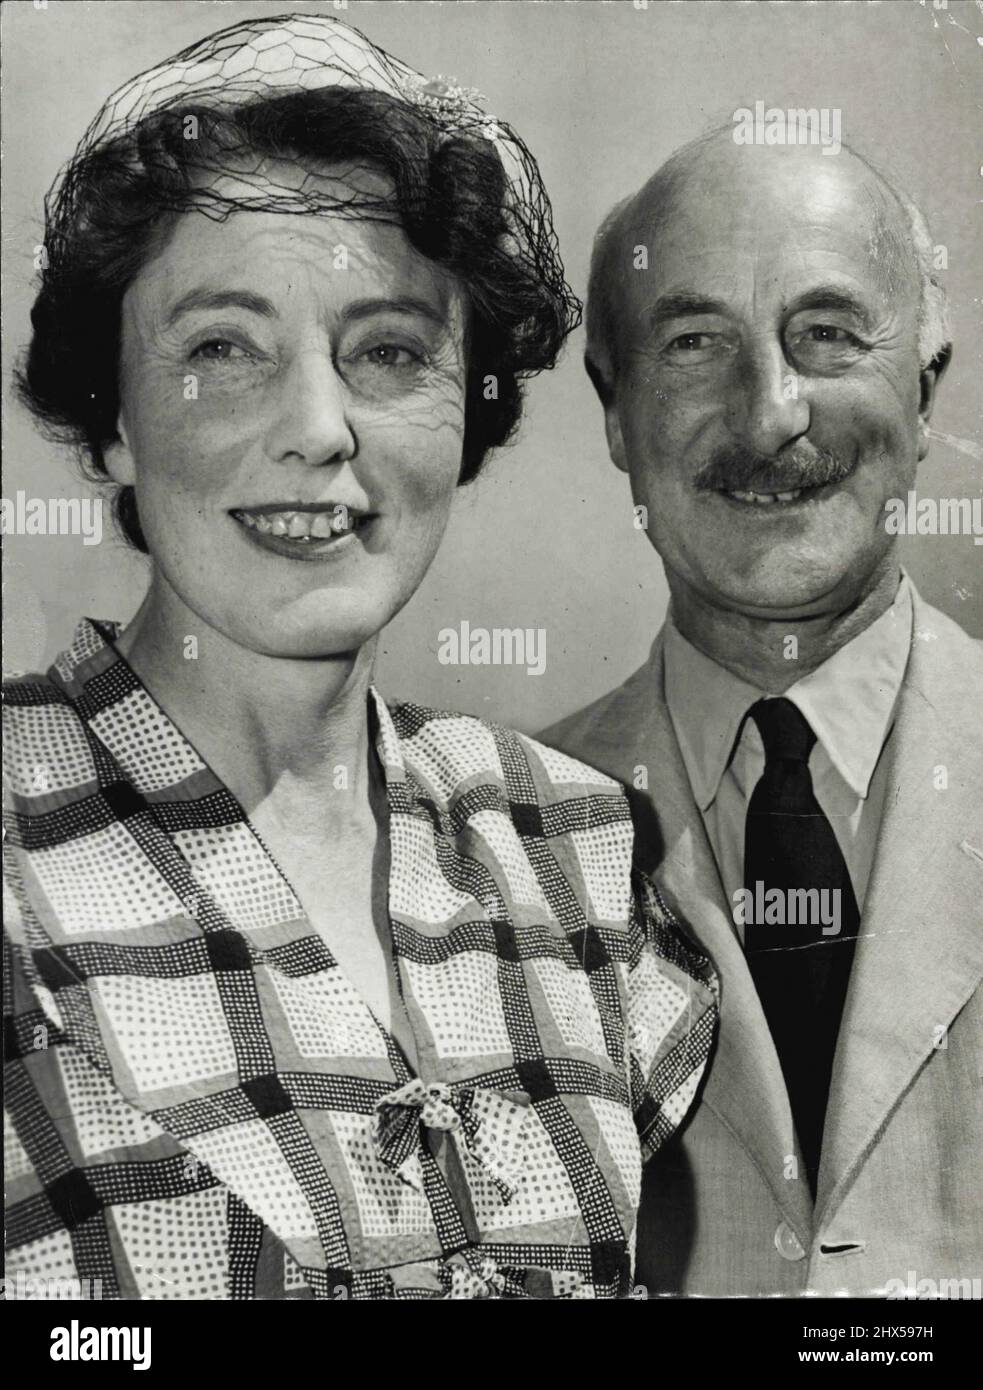 Chaiman of wallowed chocolate firm. Mr. L. J. Cadbury, arrived in Sydney by air today with his wife to visit the Cadbury factories for the first time since they were established here 30 years ago. Mr. Cadbury is a director of the bank of England. November 03, 1951. Stock Photo